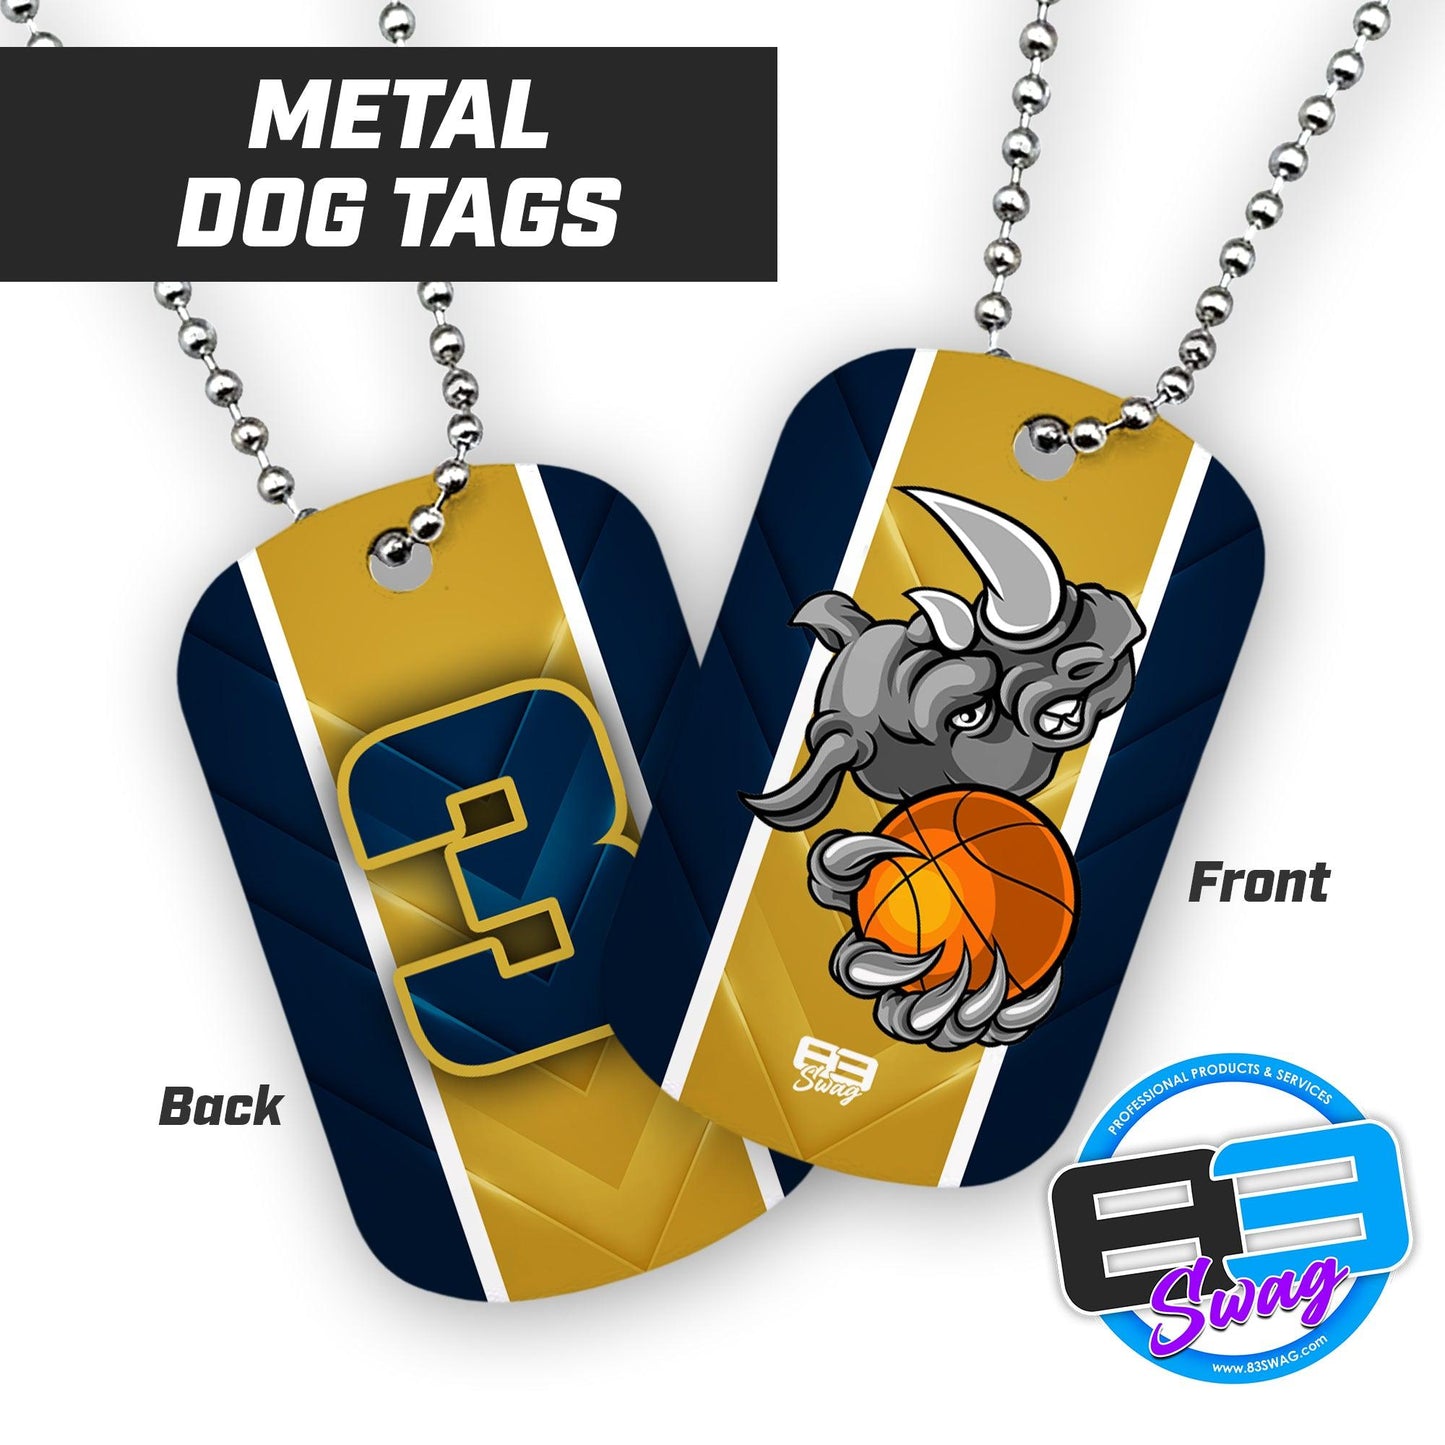 Rhino Basketball - Double Sided Dog Tags - Includes Chain